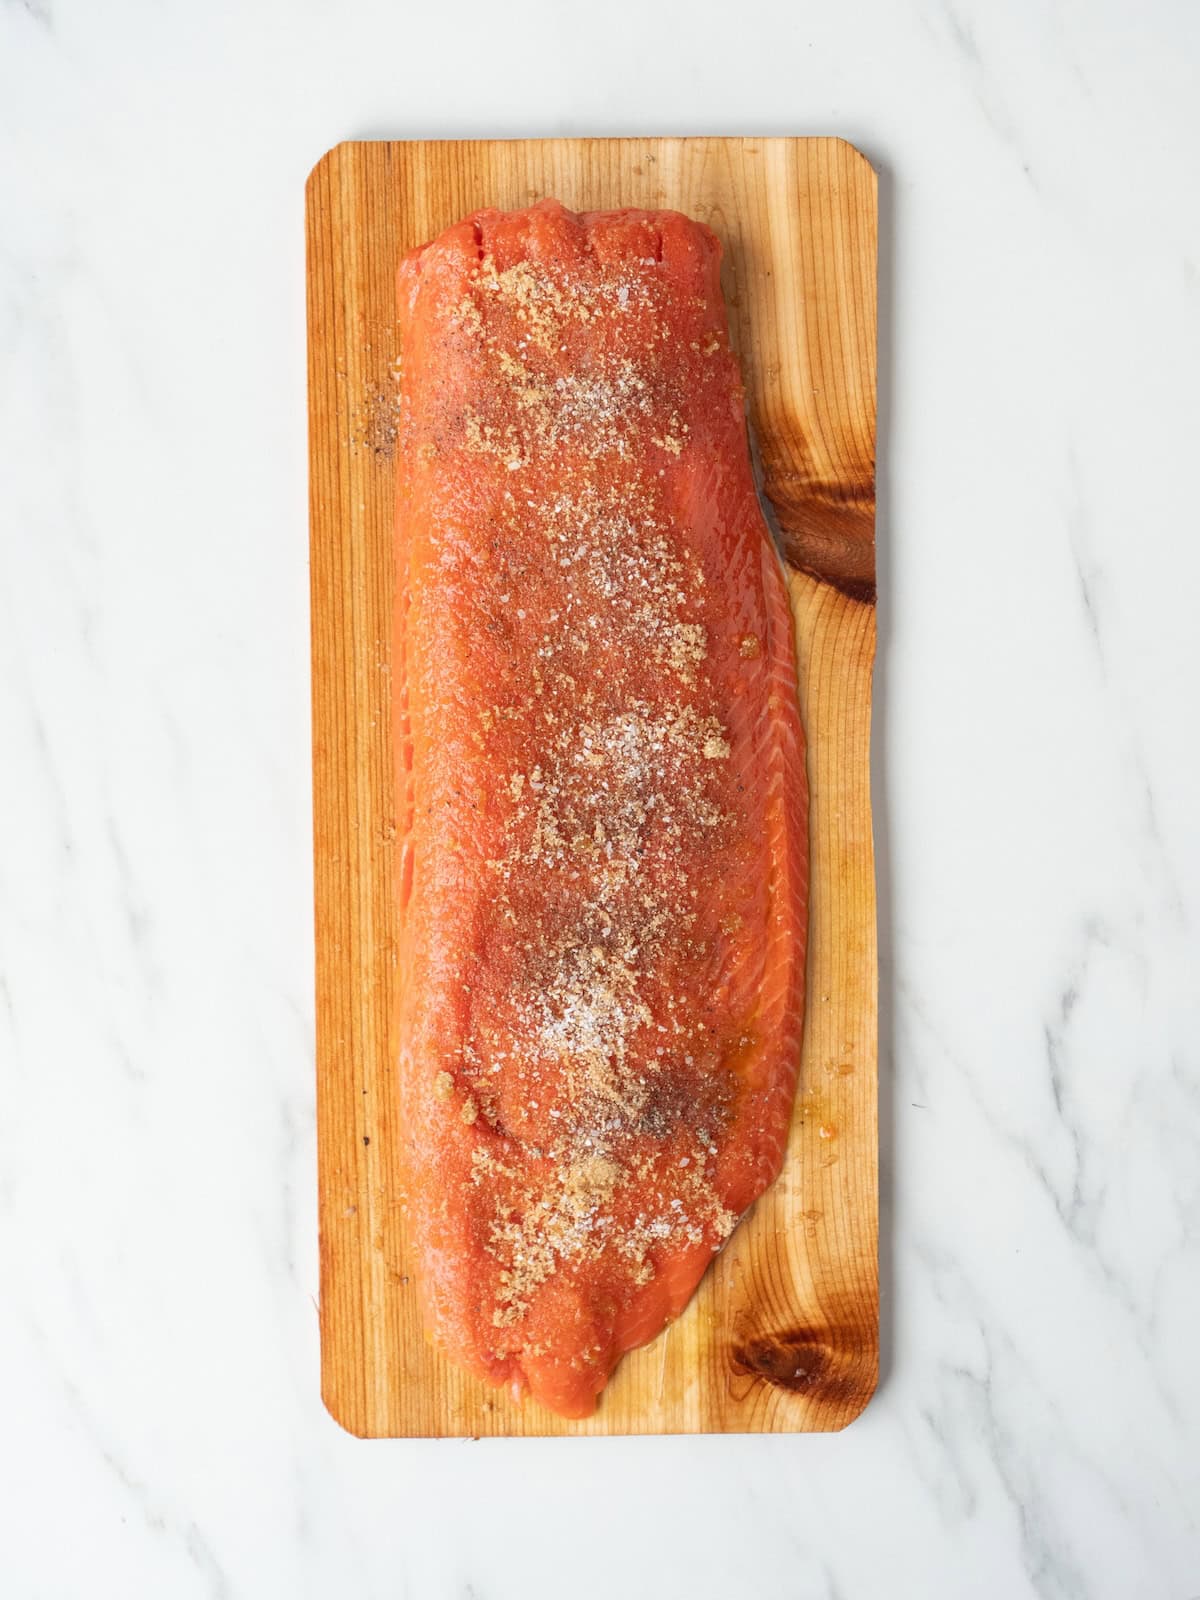 A cedar plank with salmon filet, skin side down, drizzled with olive oil and sprinkled with brown sugar, salt and pepper.